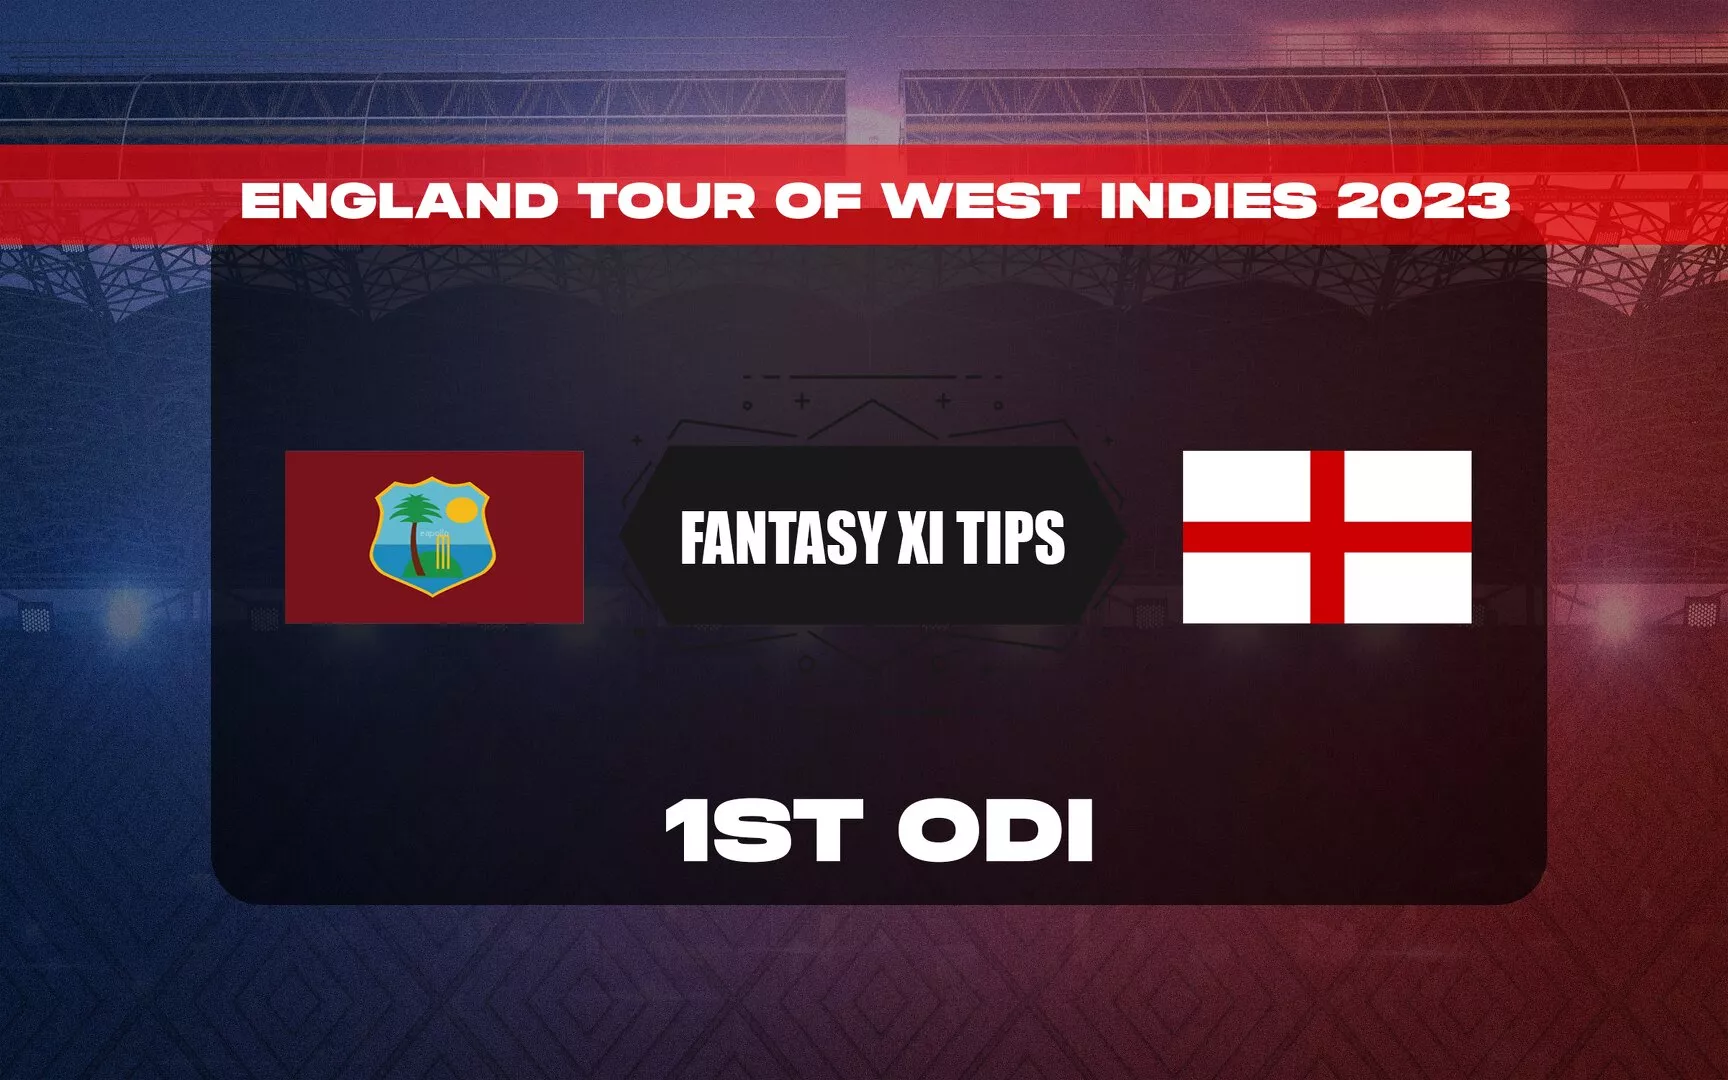 WI vs ENG Dream11 Prediction, Dream11 Playing XI, Today 1st ODI, England tour of West Indies 2023